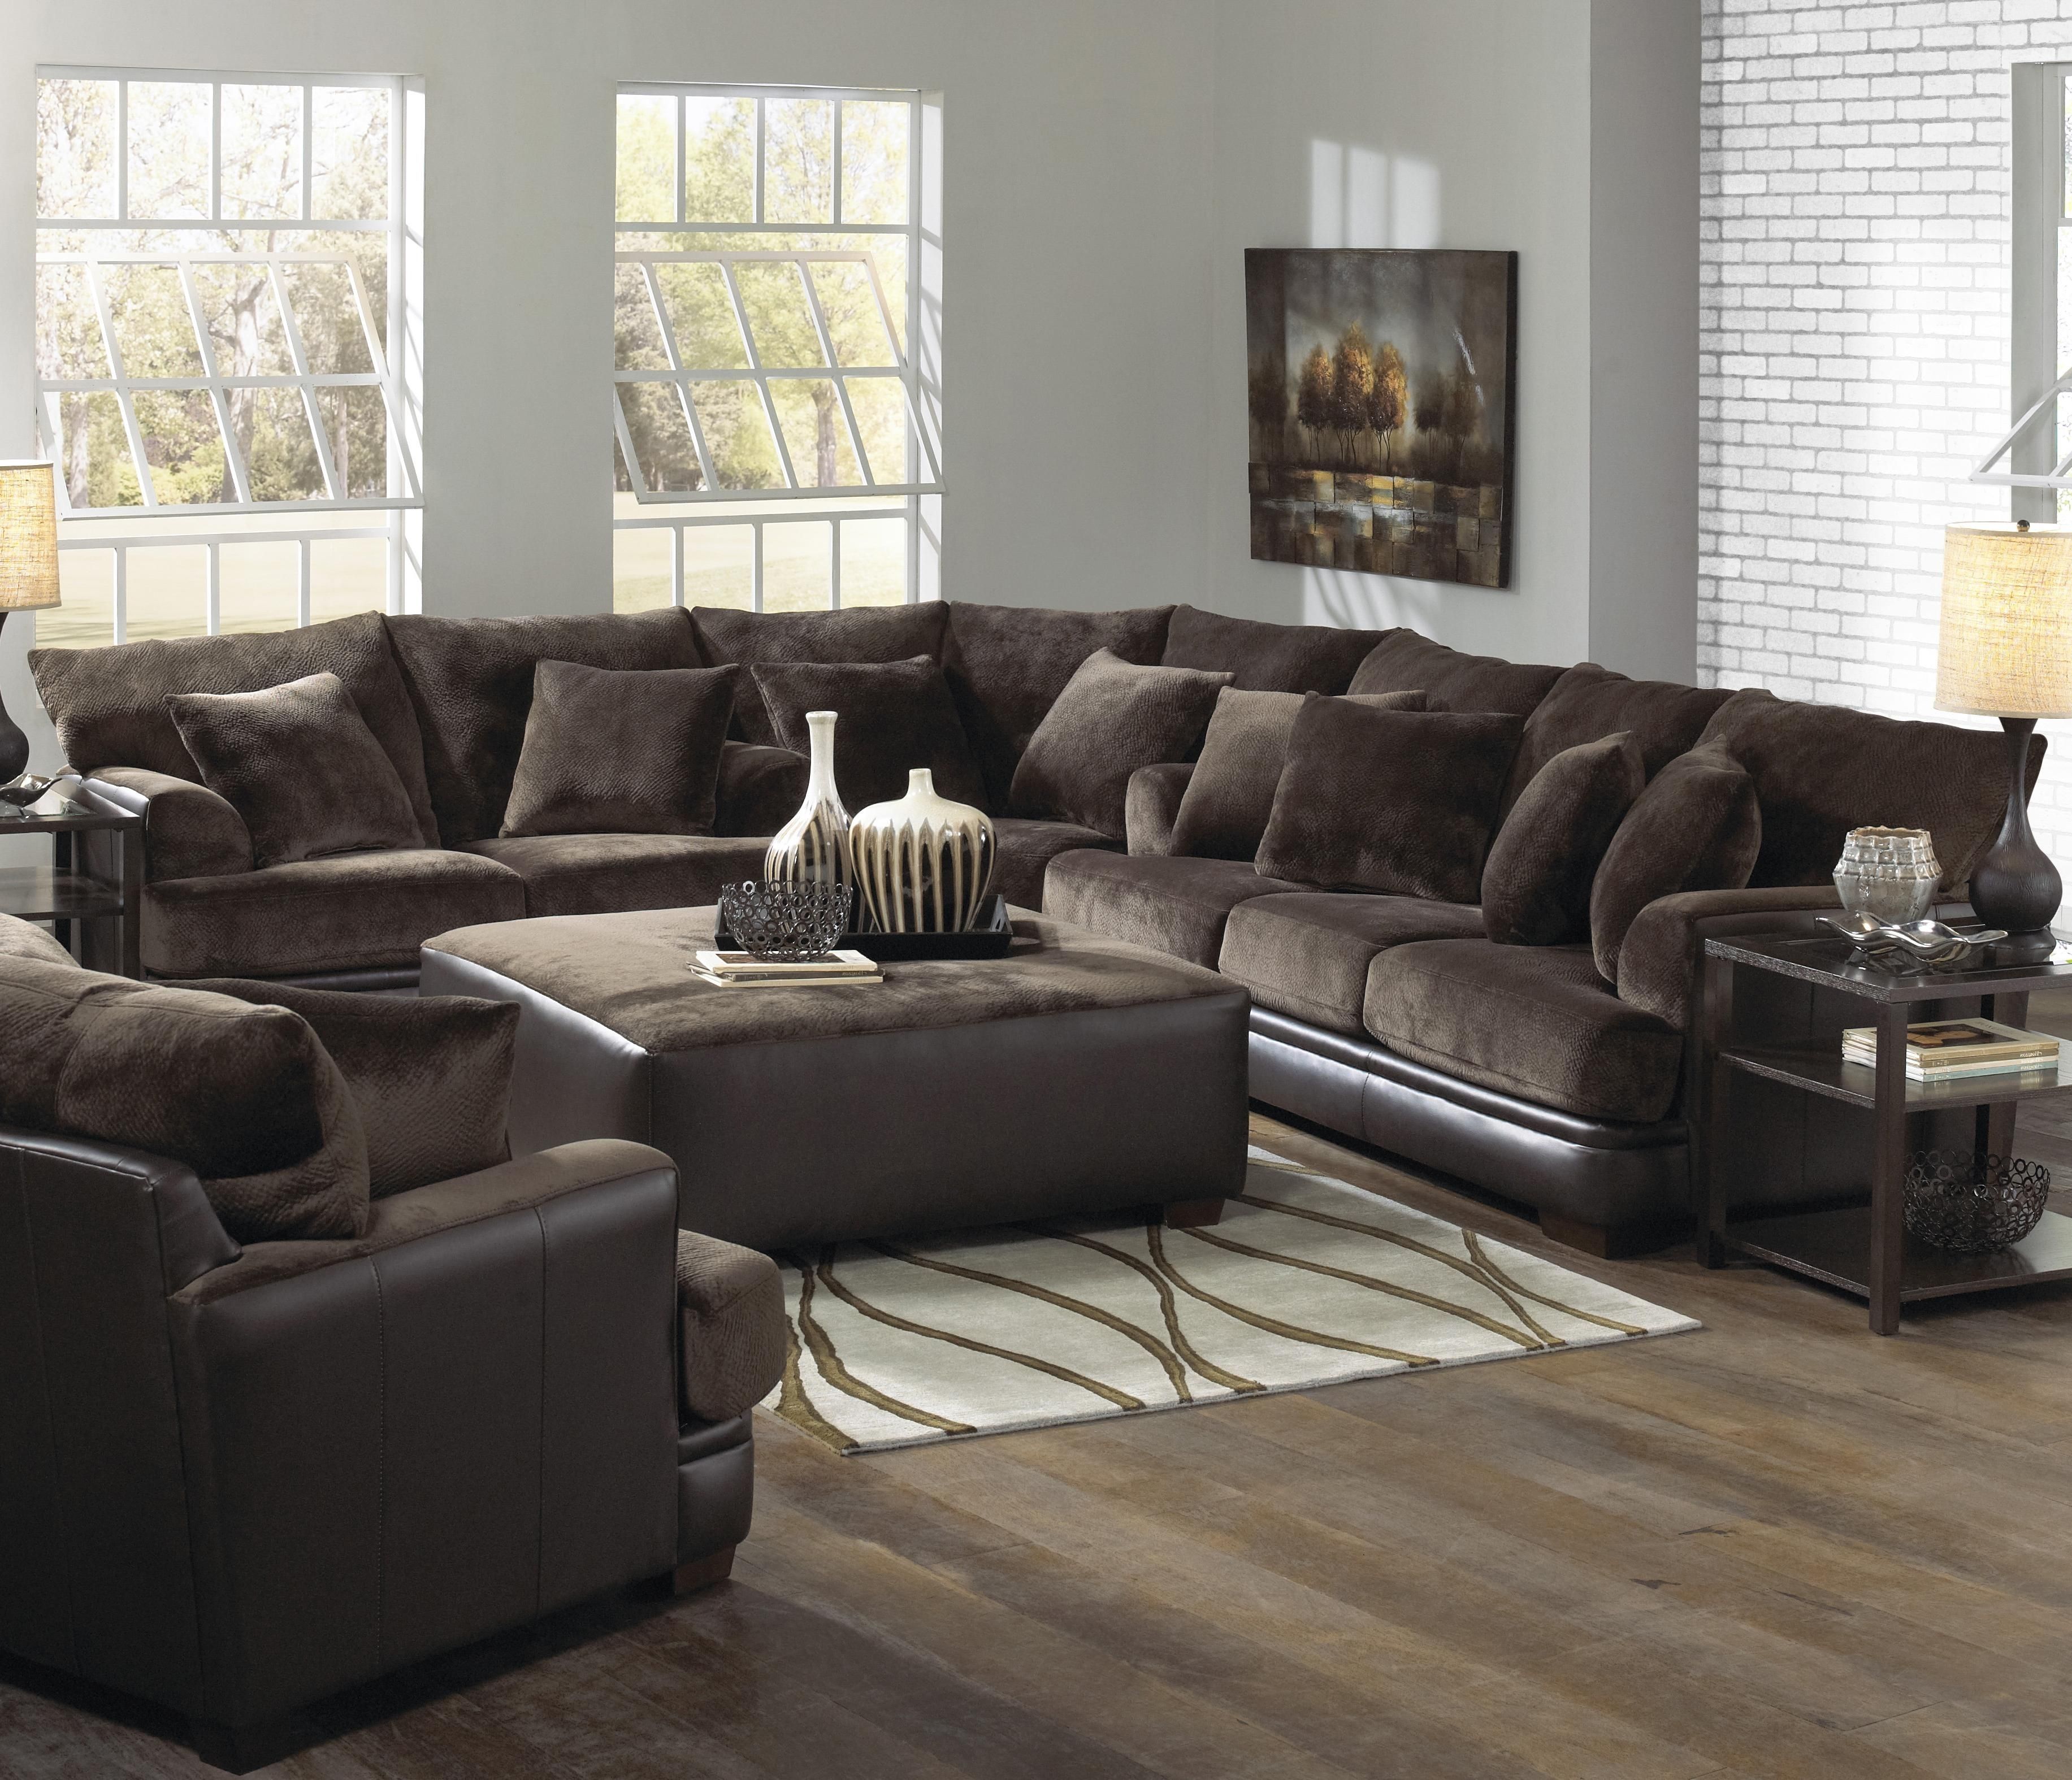 Furniture: Interesting Living Room Interior Using Large Sectional Intended For Extra Large U Shaped Sectionals (View 4 of 10)